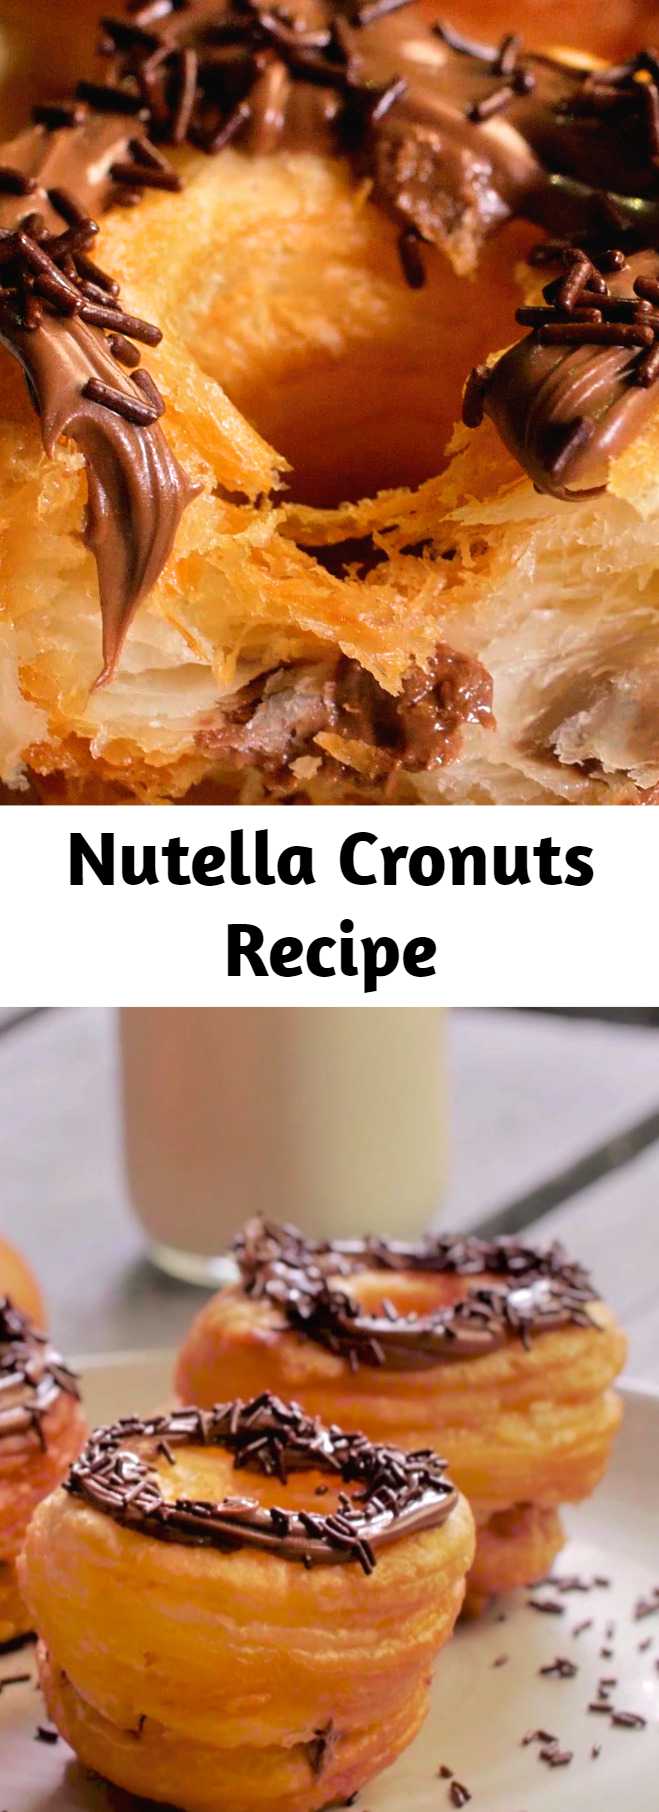 Deep-fried to golden perfection and stuffed with Nutella — what more could you want in a cronut?